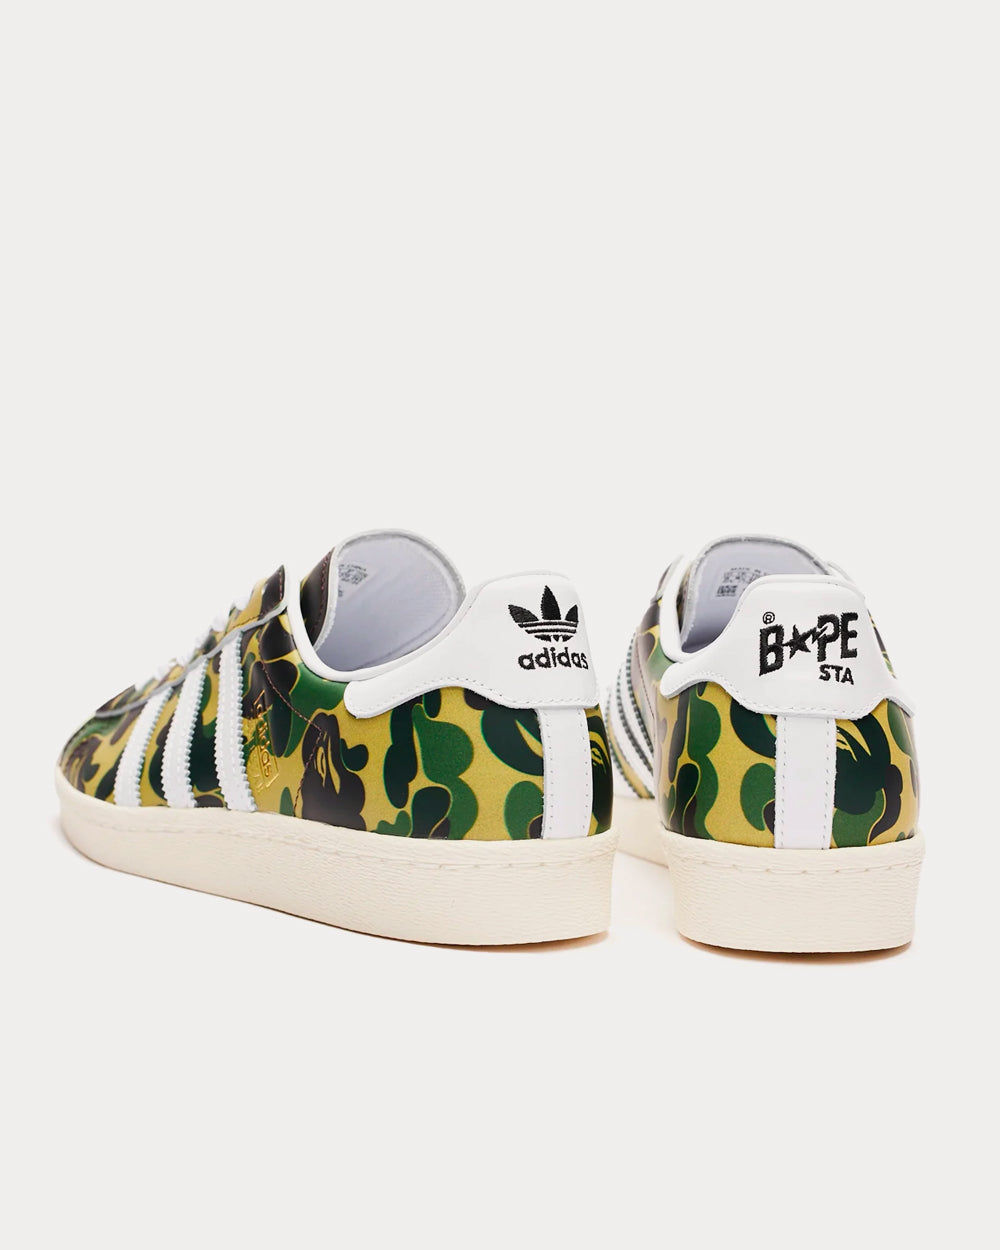 Adidas x BAPE - Superstar 80s Off White / Ftwwht / Goldmt Low Top Sneakers